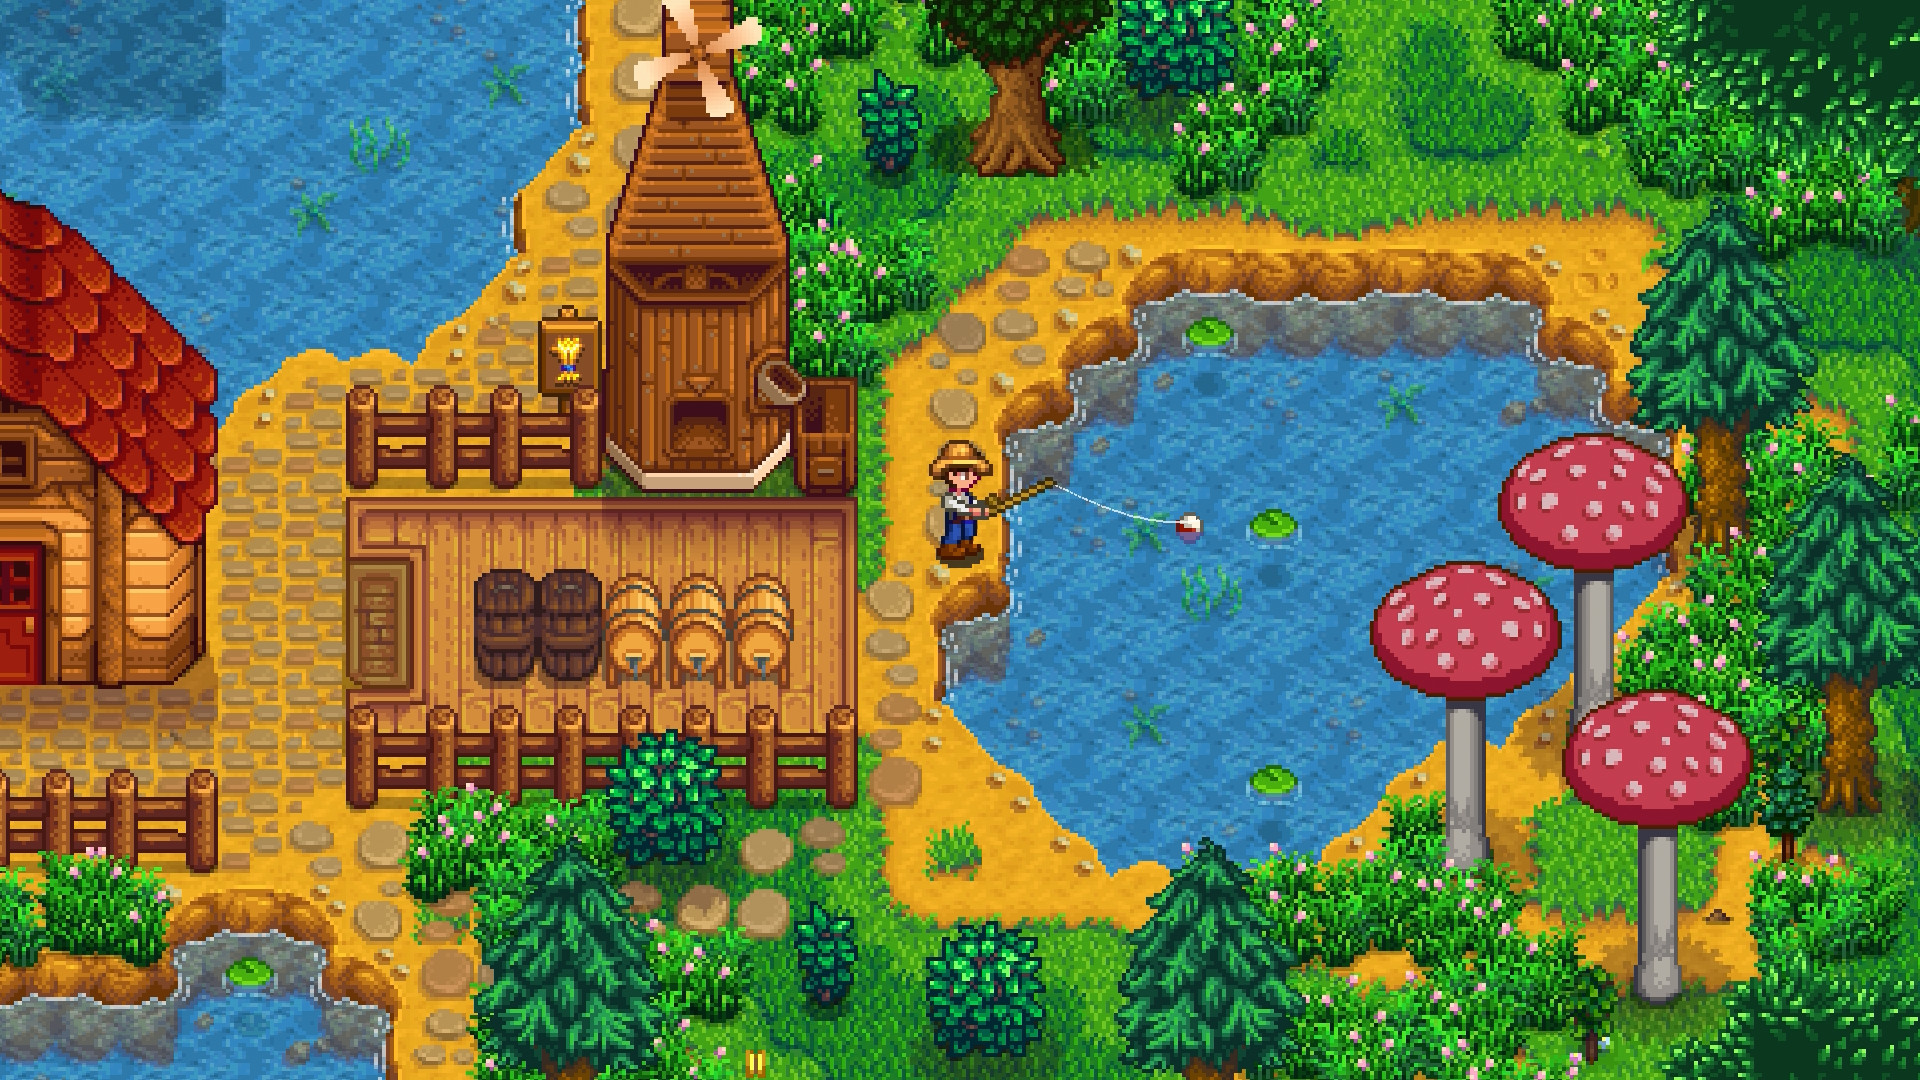 This Stardew Valley mod makes the Alembic even more lucrative